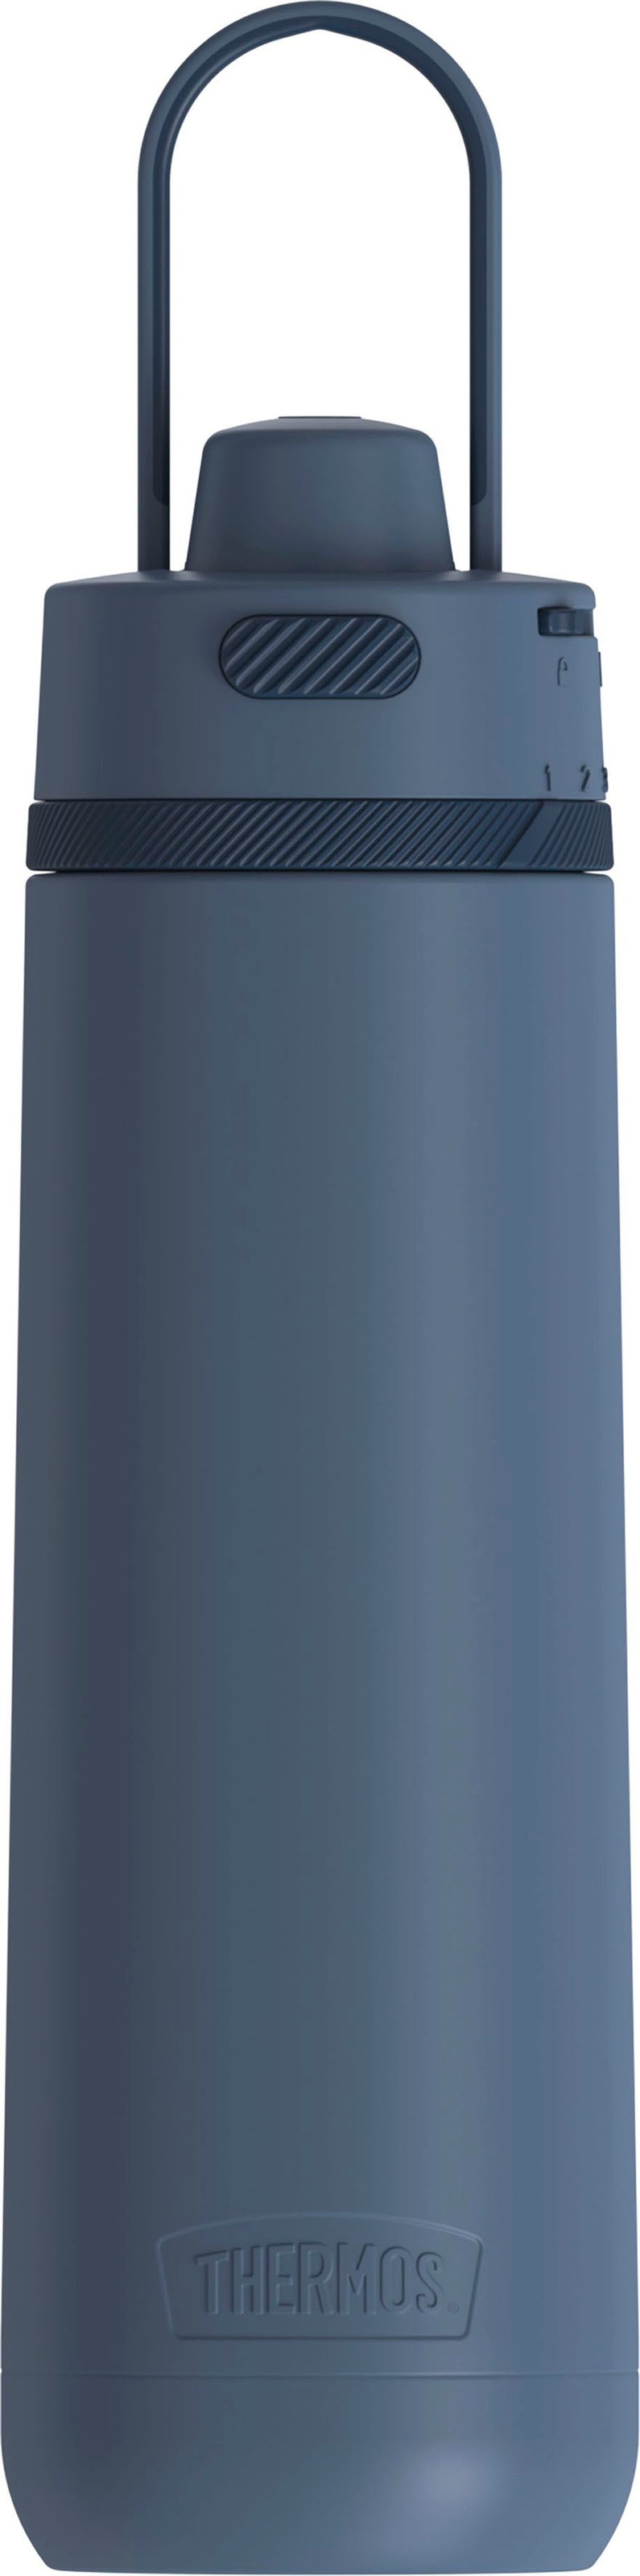 THERMOS Thermobehälter »GUARDIAN BOTTLE«, (1 tlg.), 0,7 L